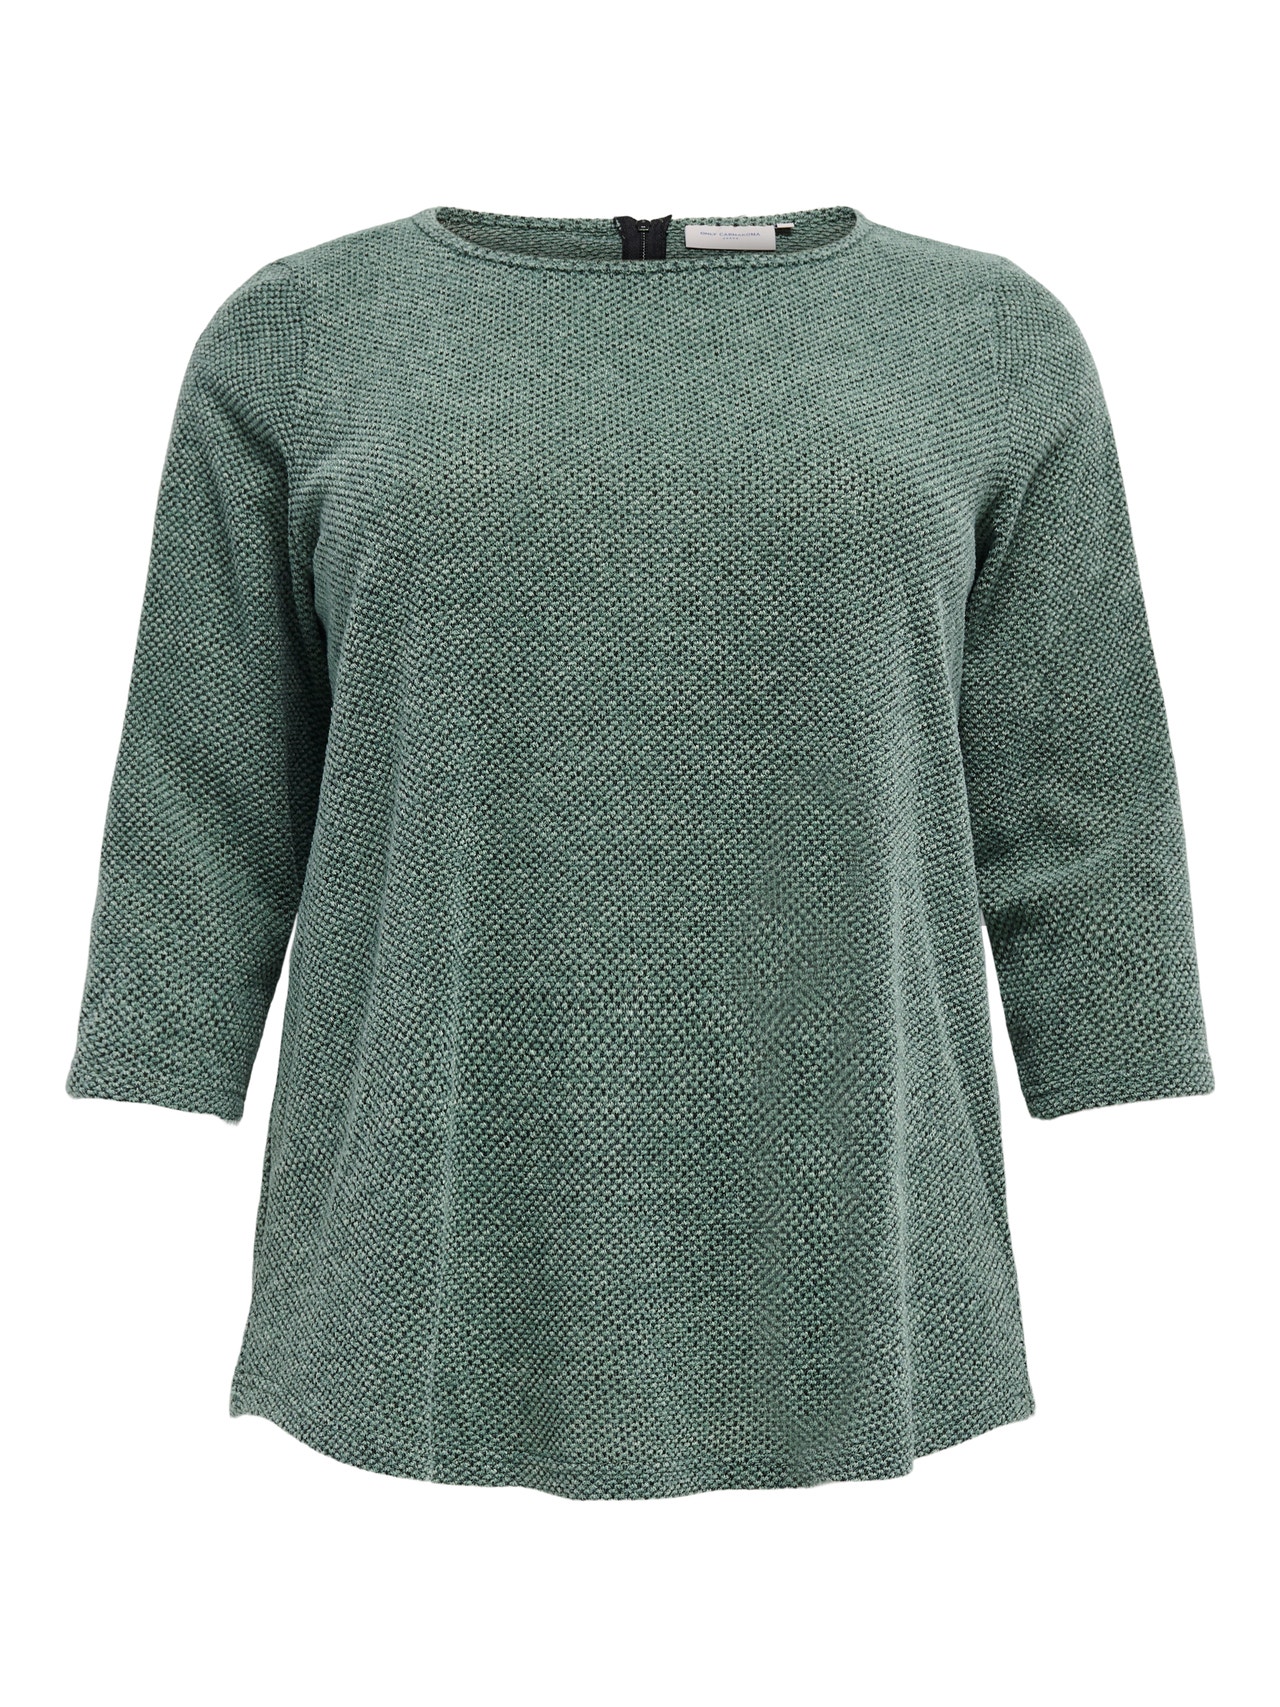 ONLY Loose Fit Boat neck Top -Green Bay - 15196518